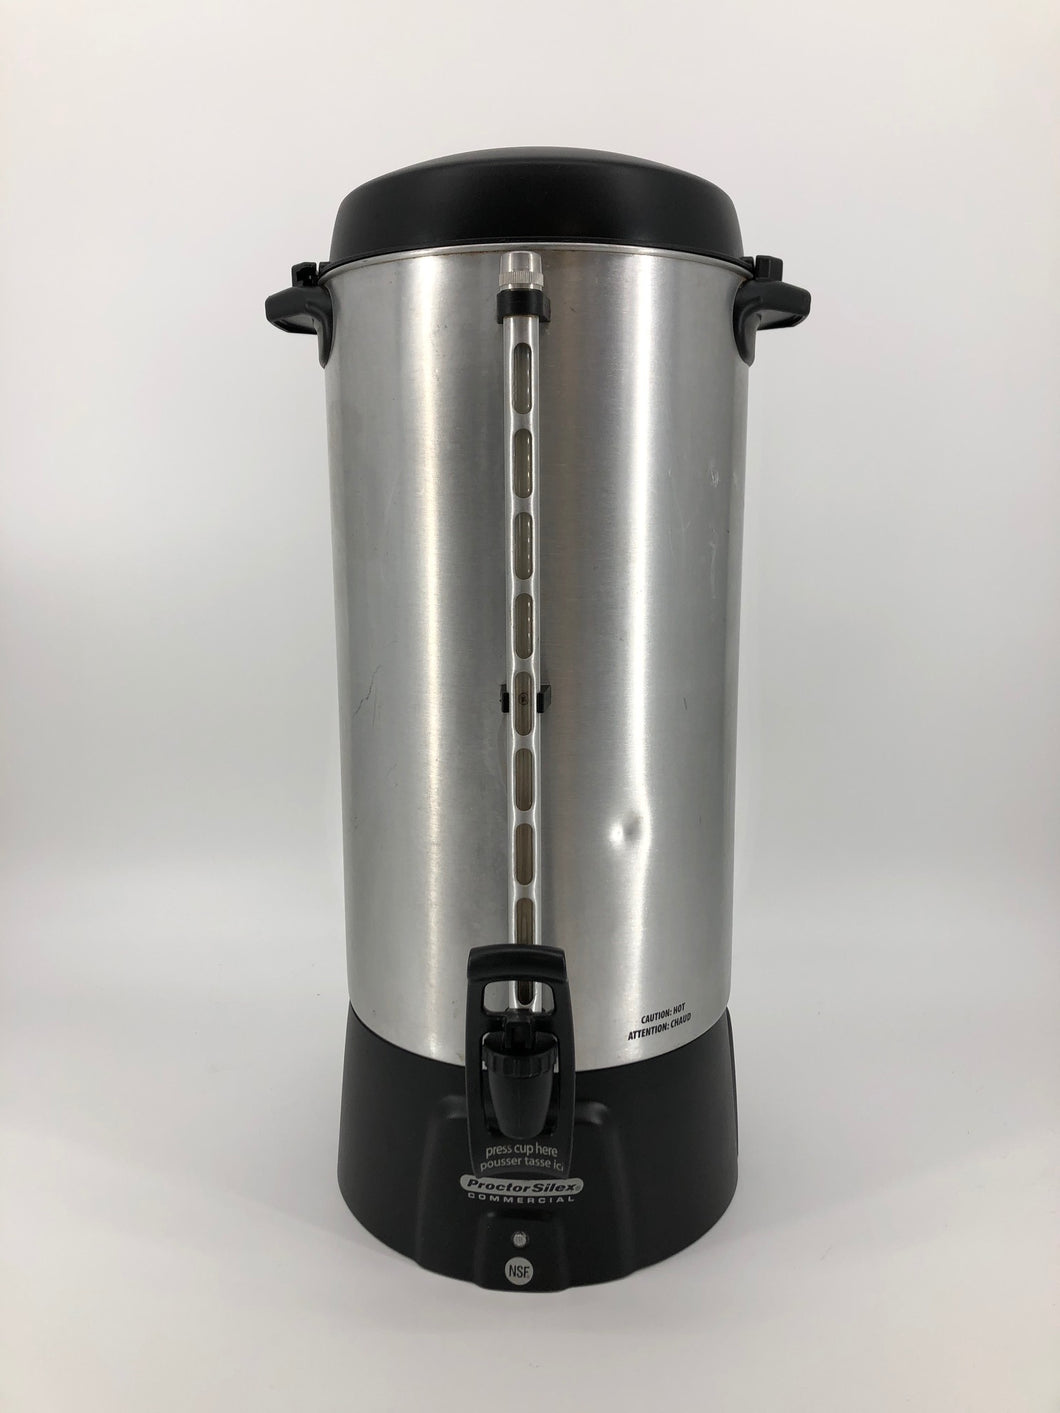 Coff maker 100 cup rentals Houston TX  Where to rent coff maker 100 cup in  Houston Texas